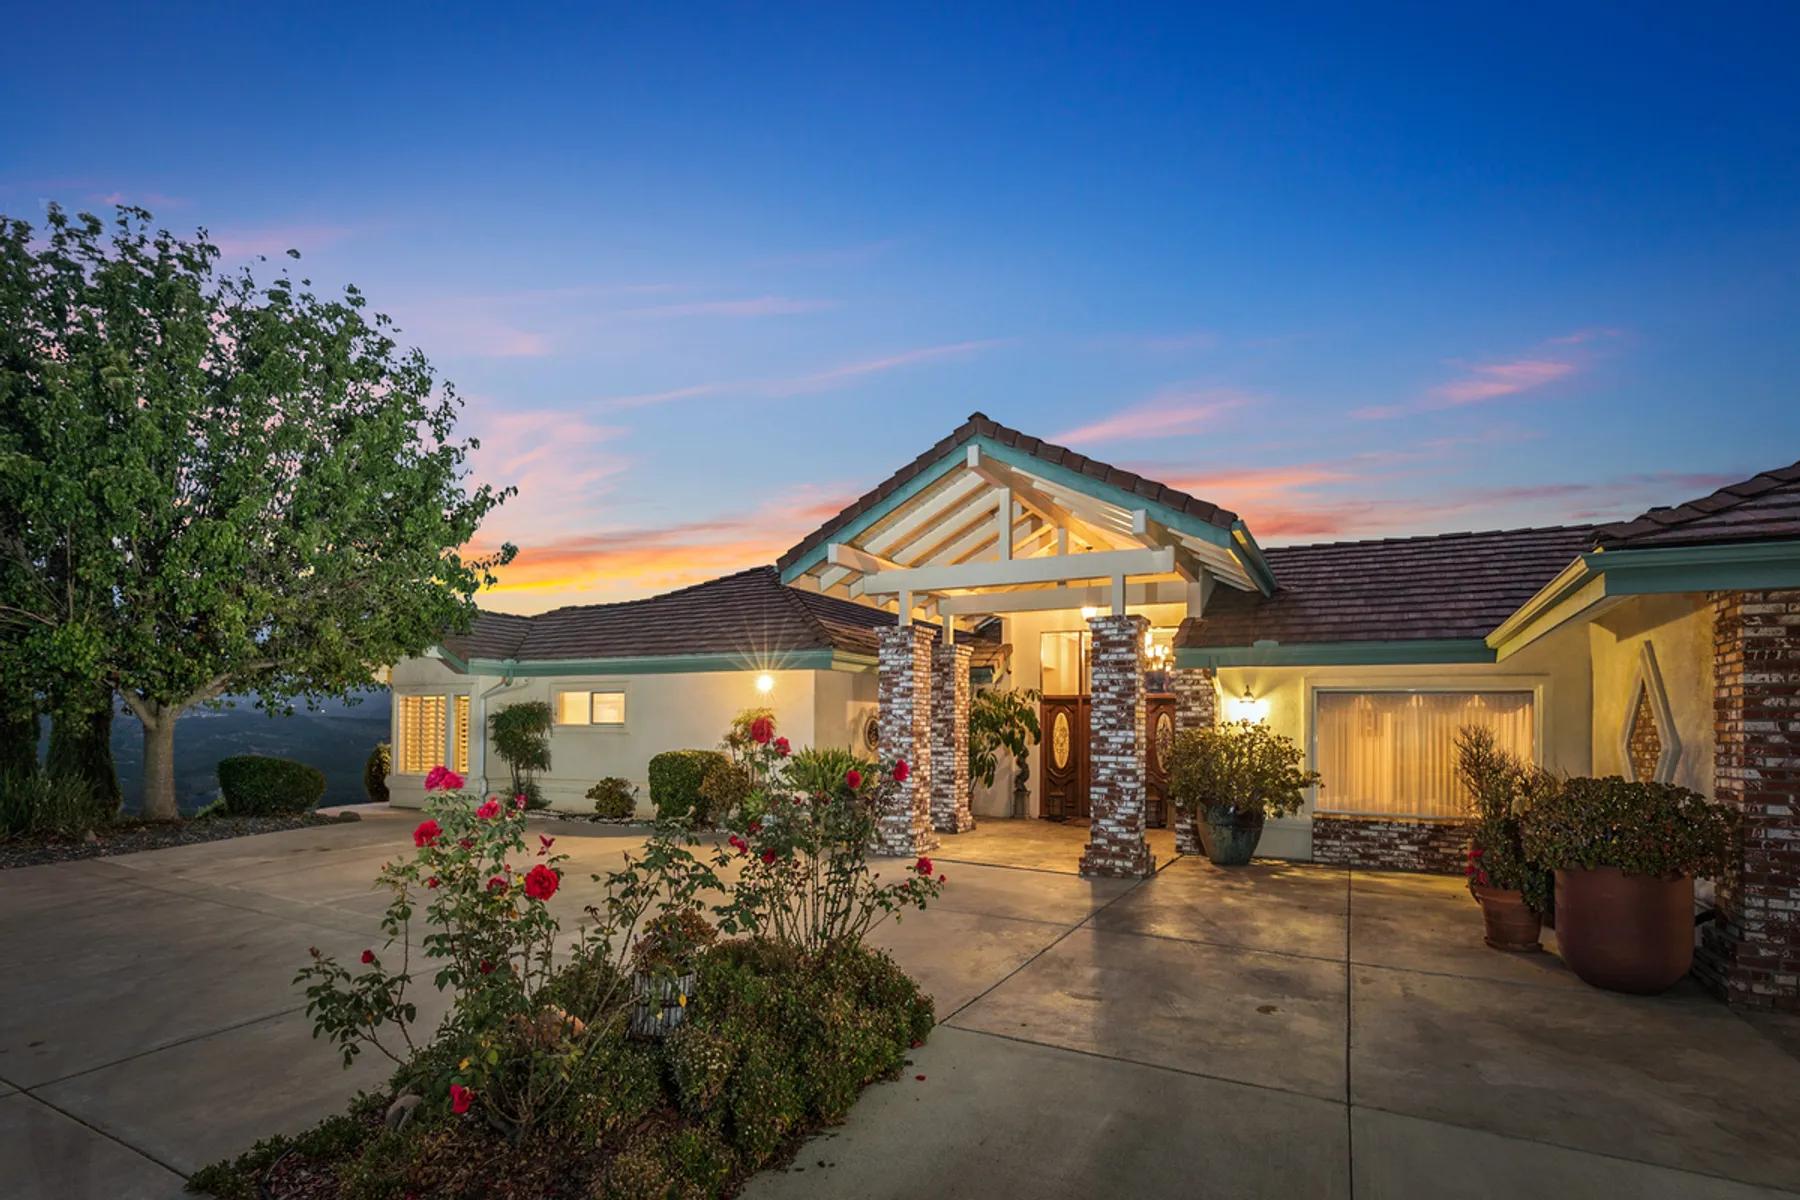 Find Luxury Real Estate in Southern California | Corcoran Global Living